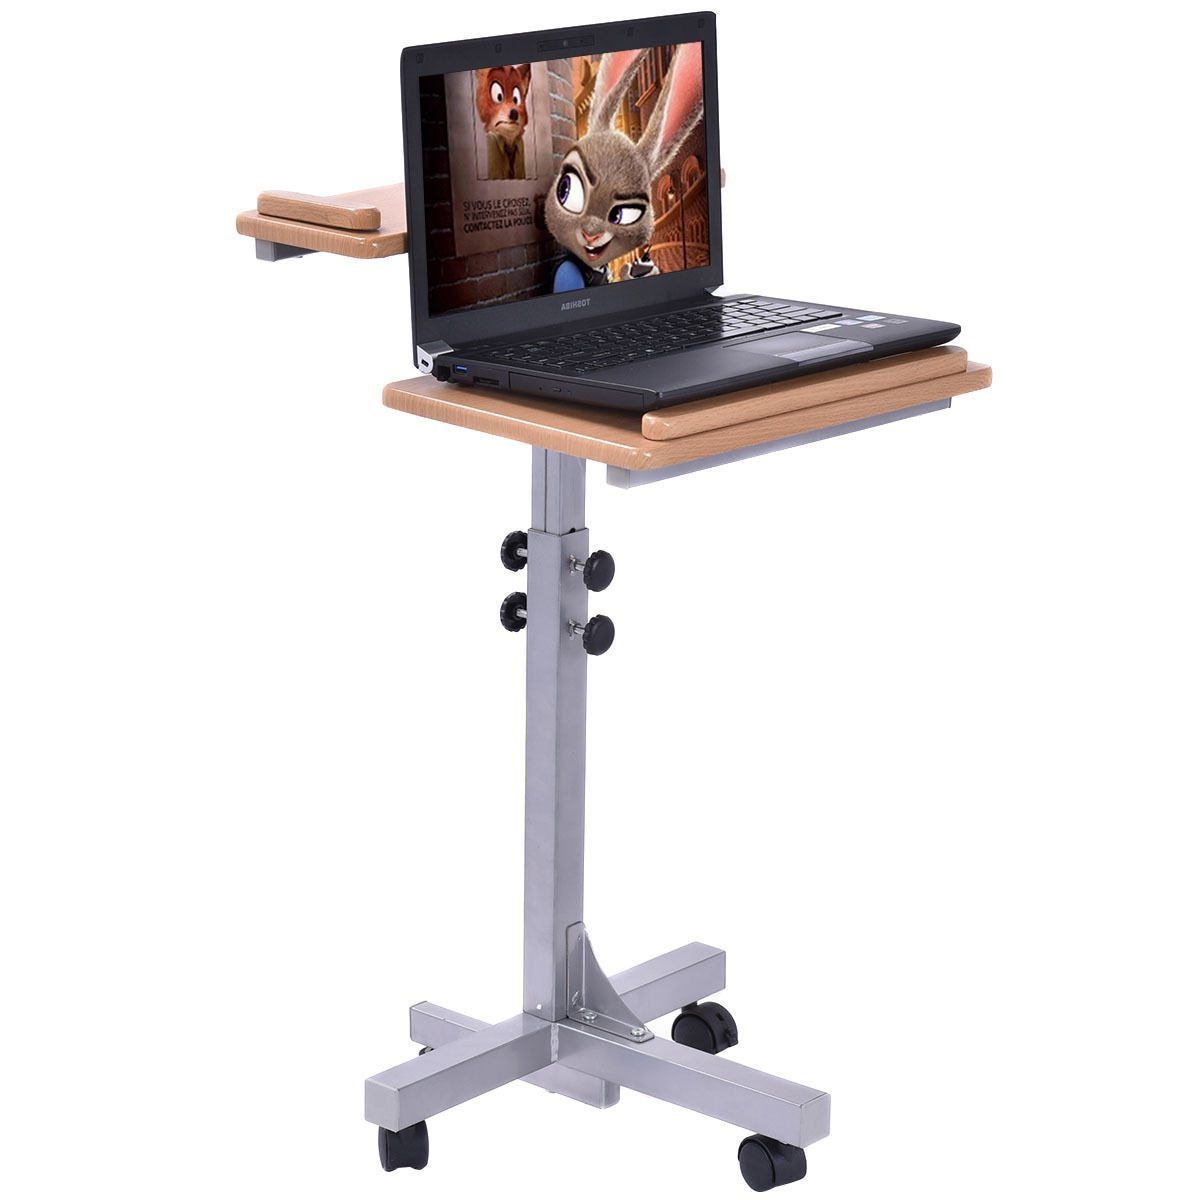 Adjustable Portable Rolling Laptop Stand Intended For Rolling Tv Stands With Wheels With Adjustable Metal Shelf (Gallery 10 of 20)